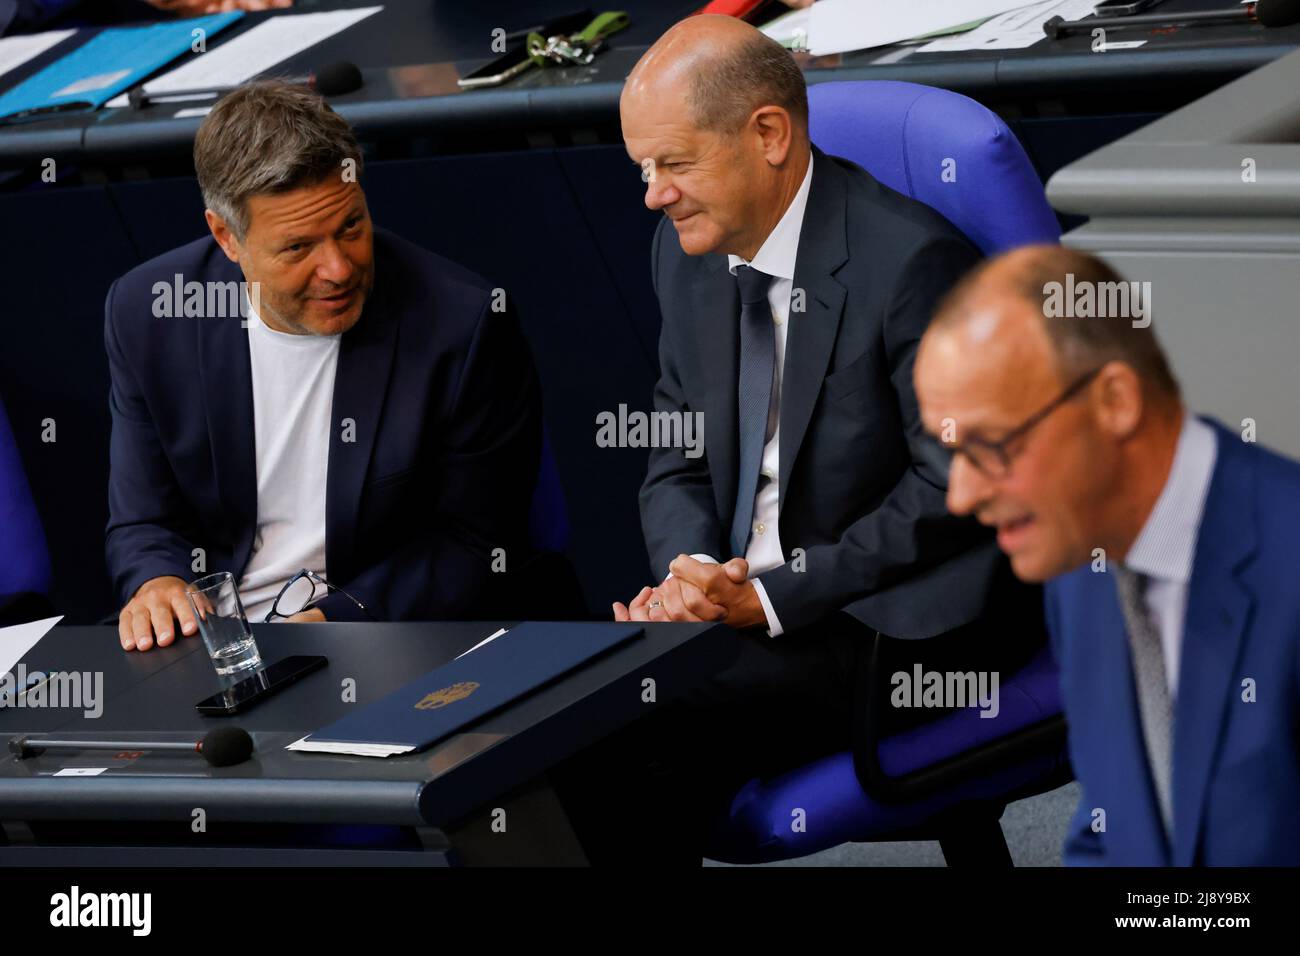 Leader of Germany's Christian Democratic Union (CDU) Friedrich Merz speaks as German Chancellor Olaf Scholz and German Economy and Climate Minister Robert Habeck discuss during a session of Germany's lower house of parliament, the Bundestag, in Berlin, Germany, May 19, 2022. REUTERS/Hannibal Hanschke Stock Photo